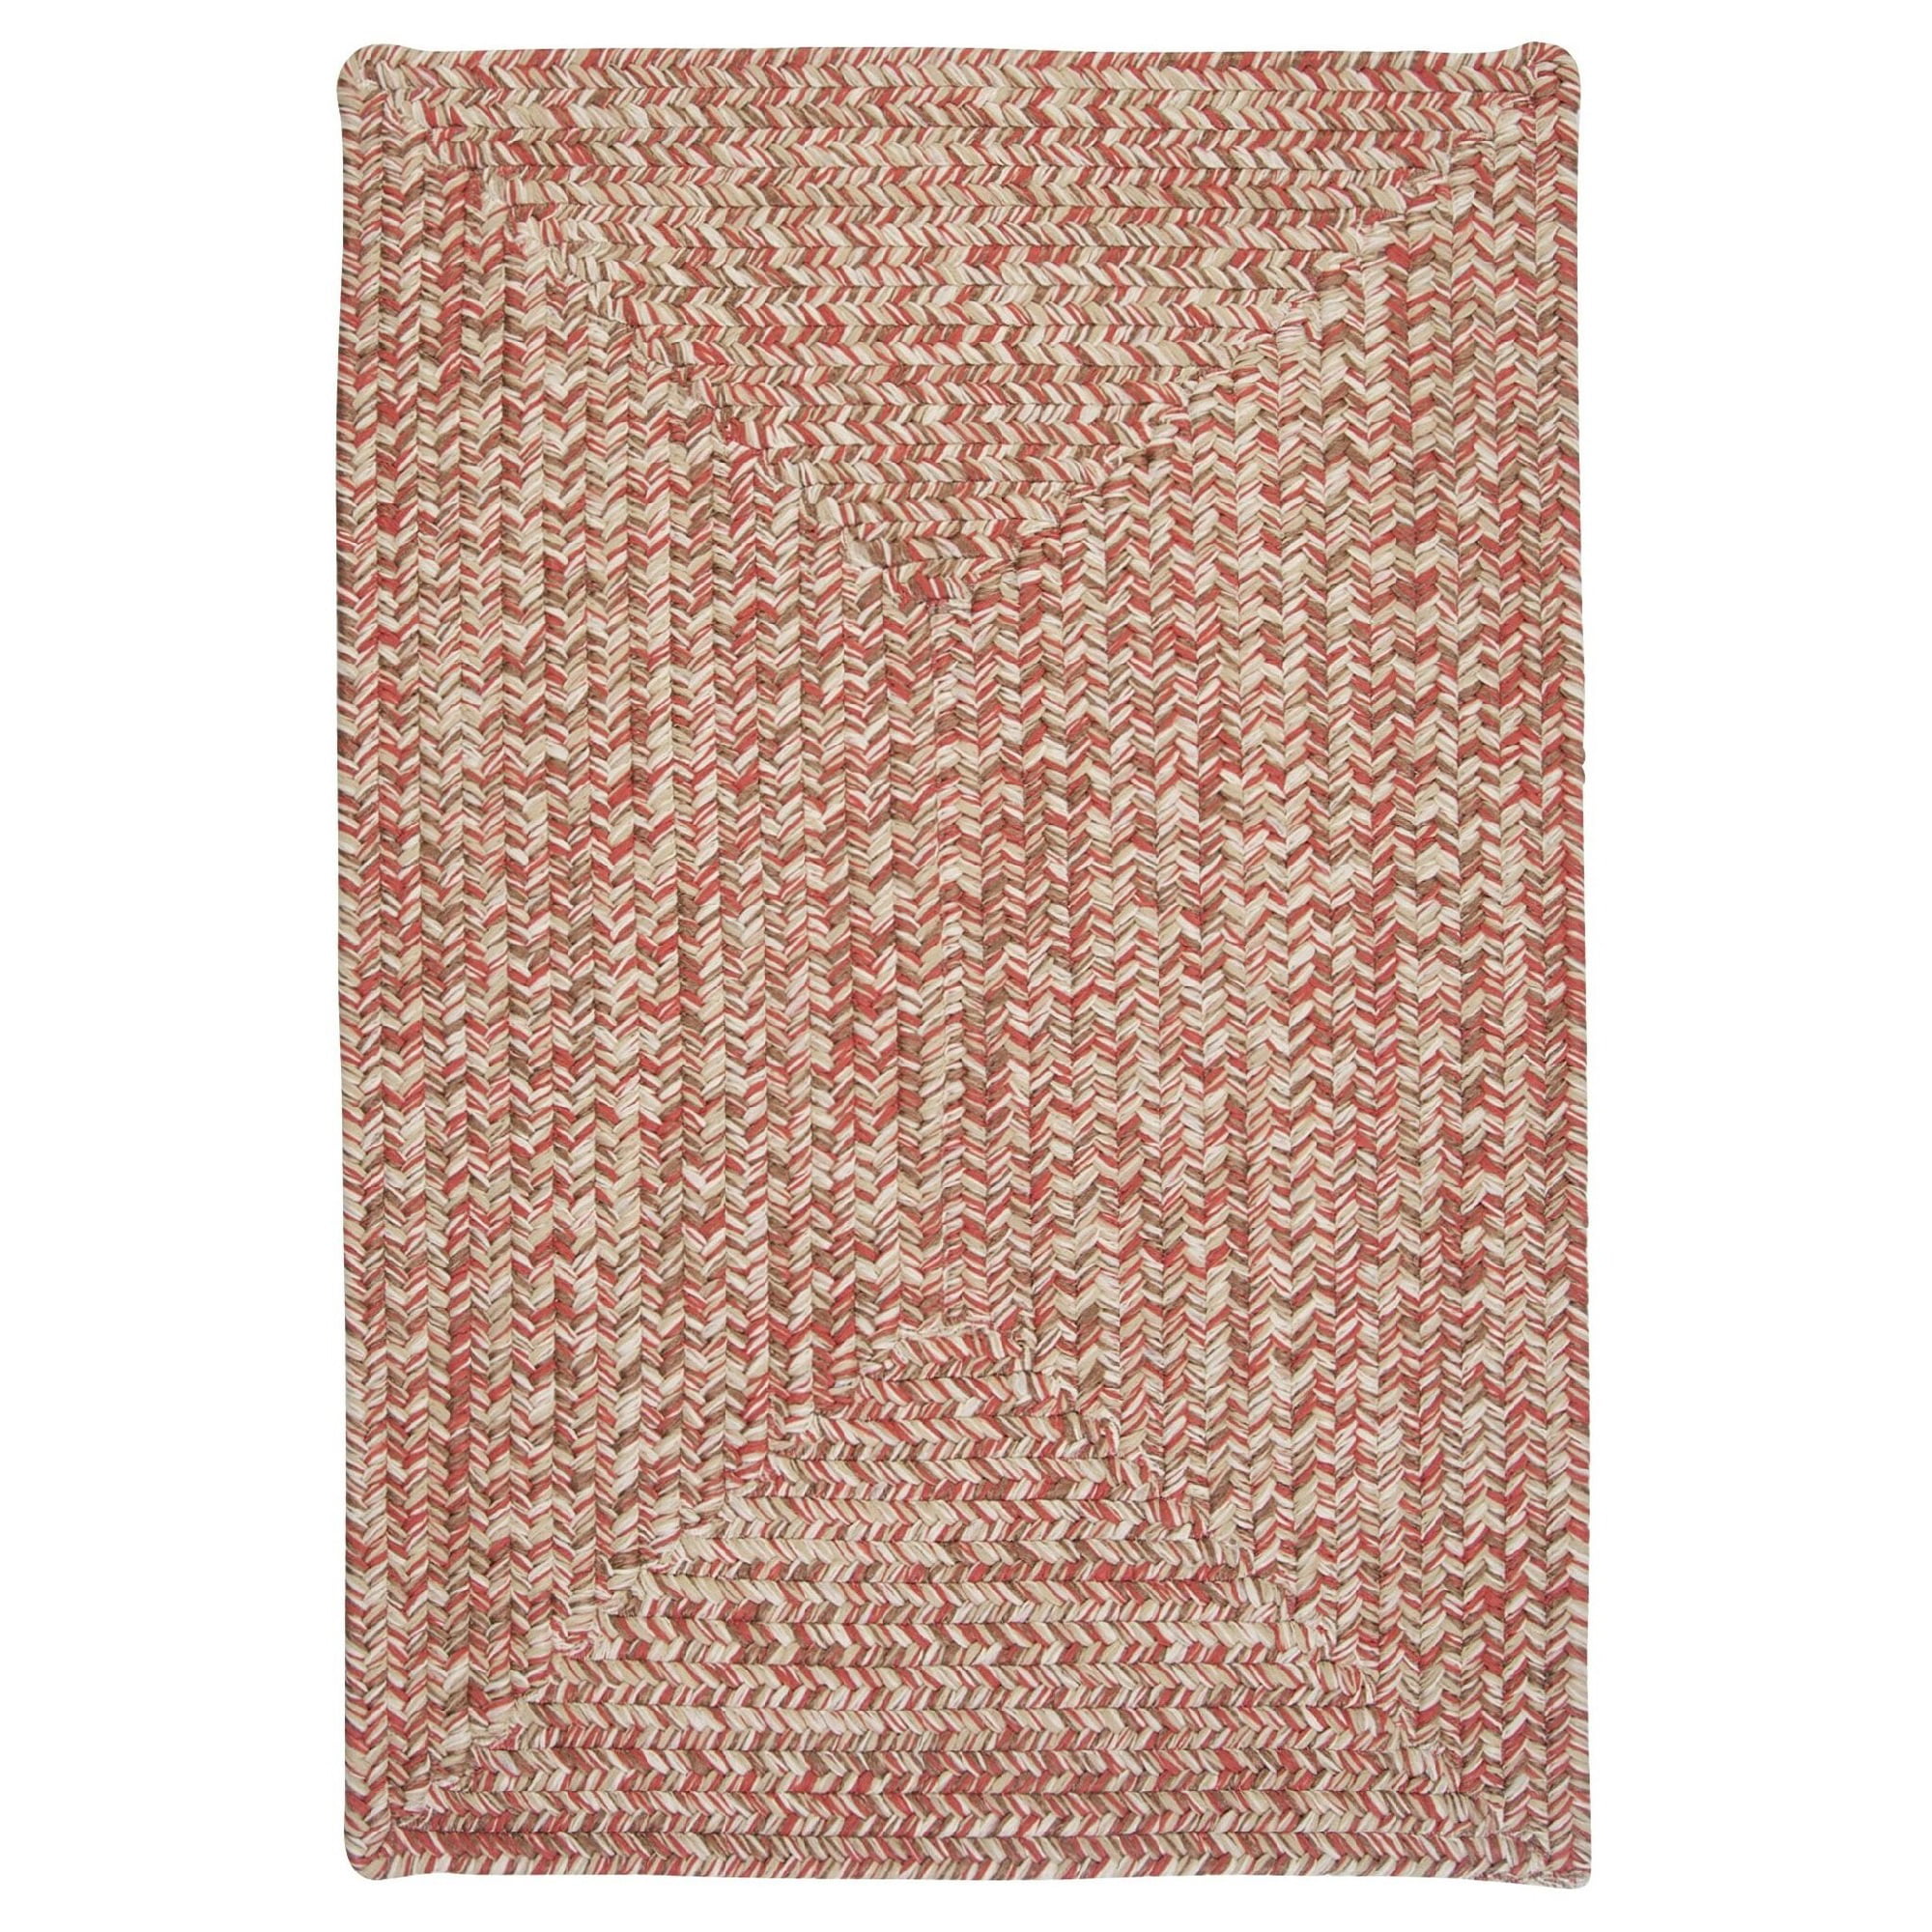 Brown Square Braided Area Rug, Red Braided Rug